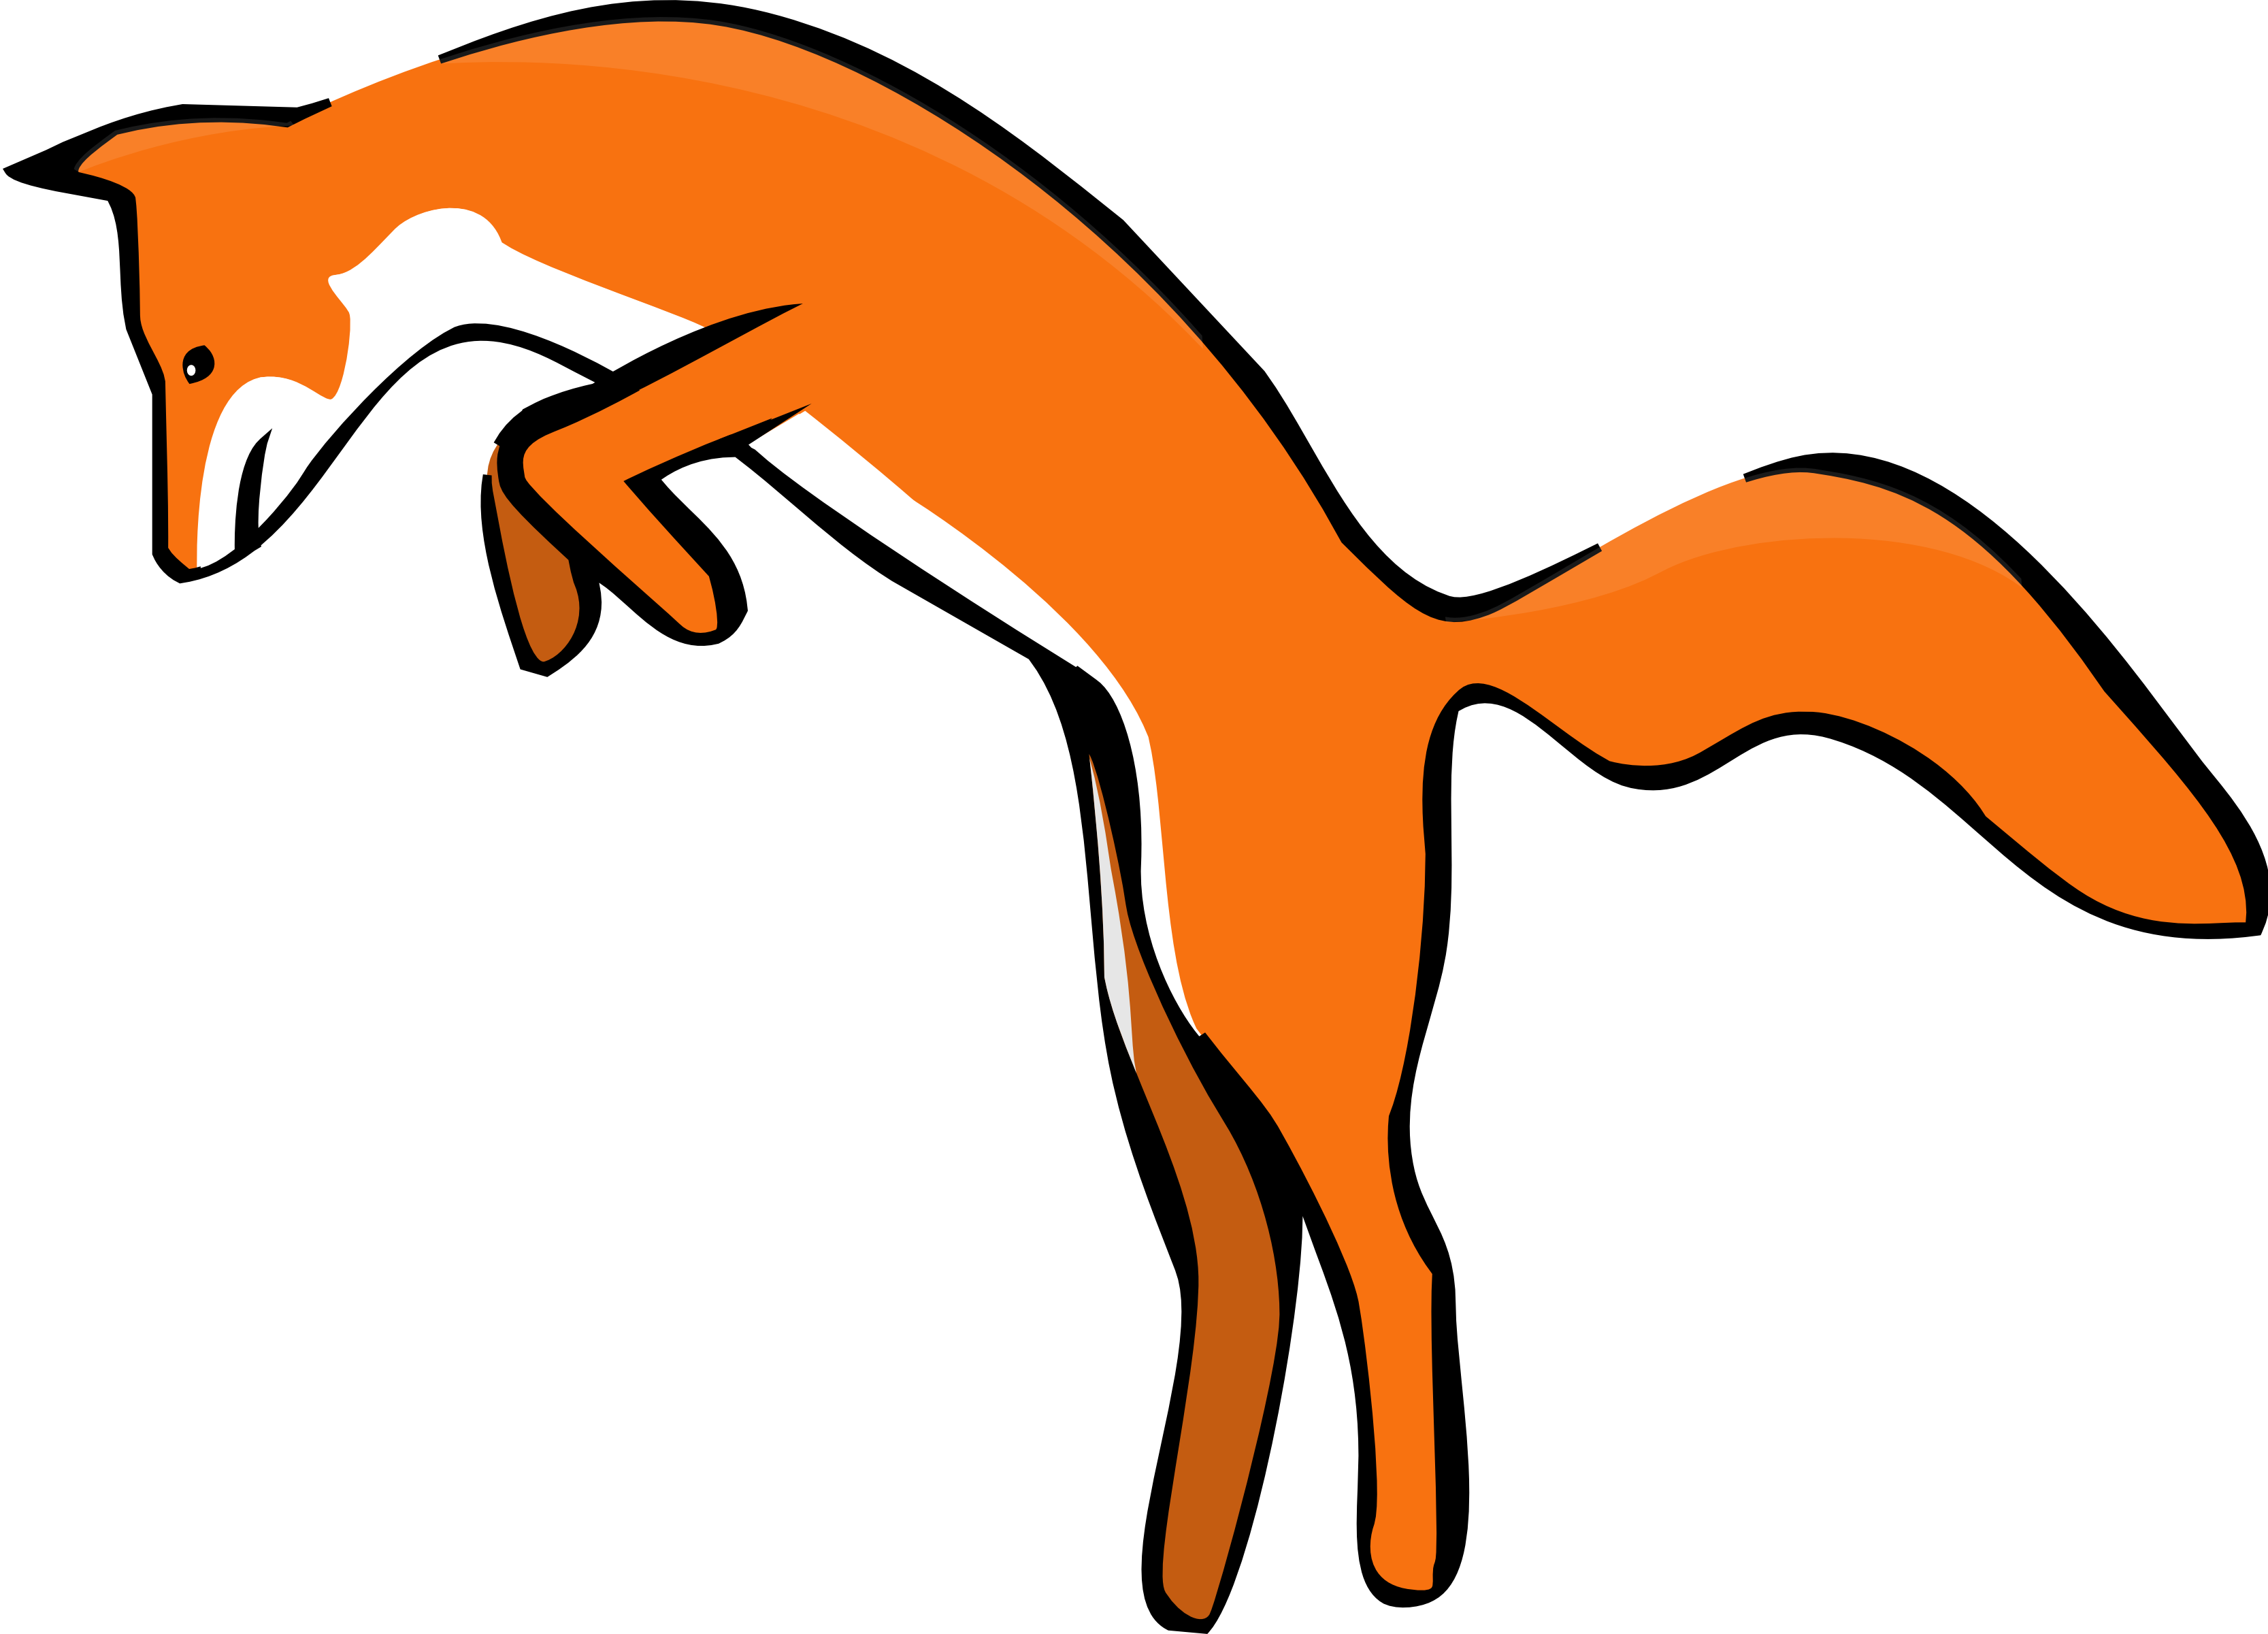 Running Fox Clipart | Clipart Panda - Free Clipart Images